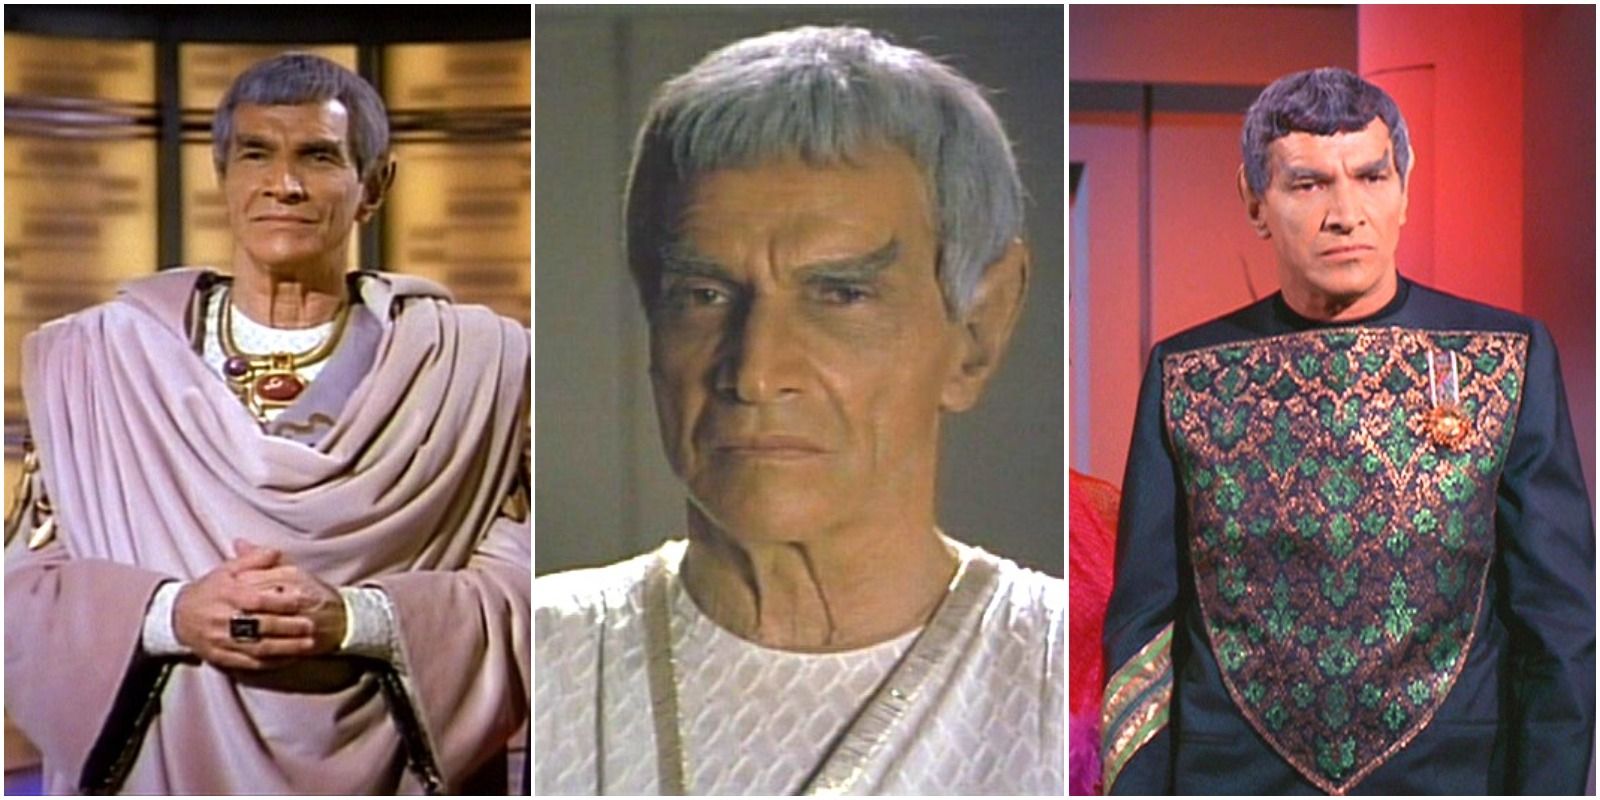 Sarek aboard the Enterprse with two of his wifes from TOS and TNG